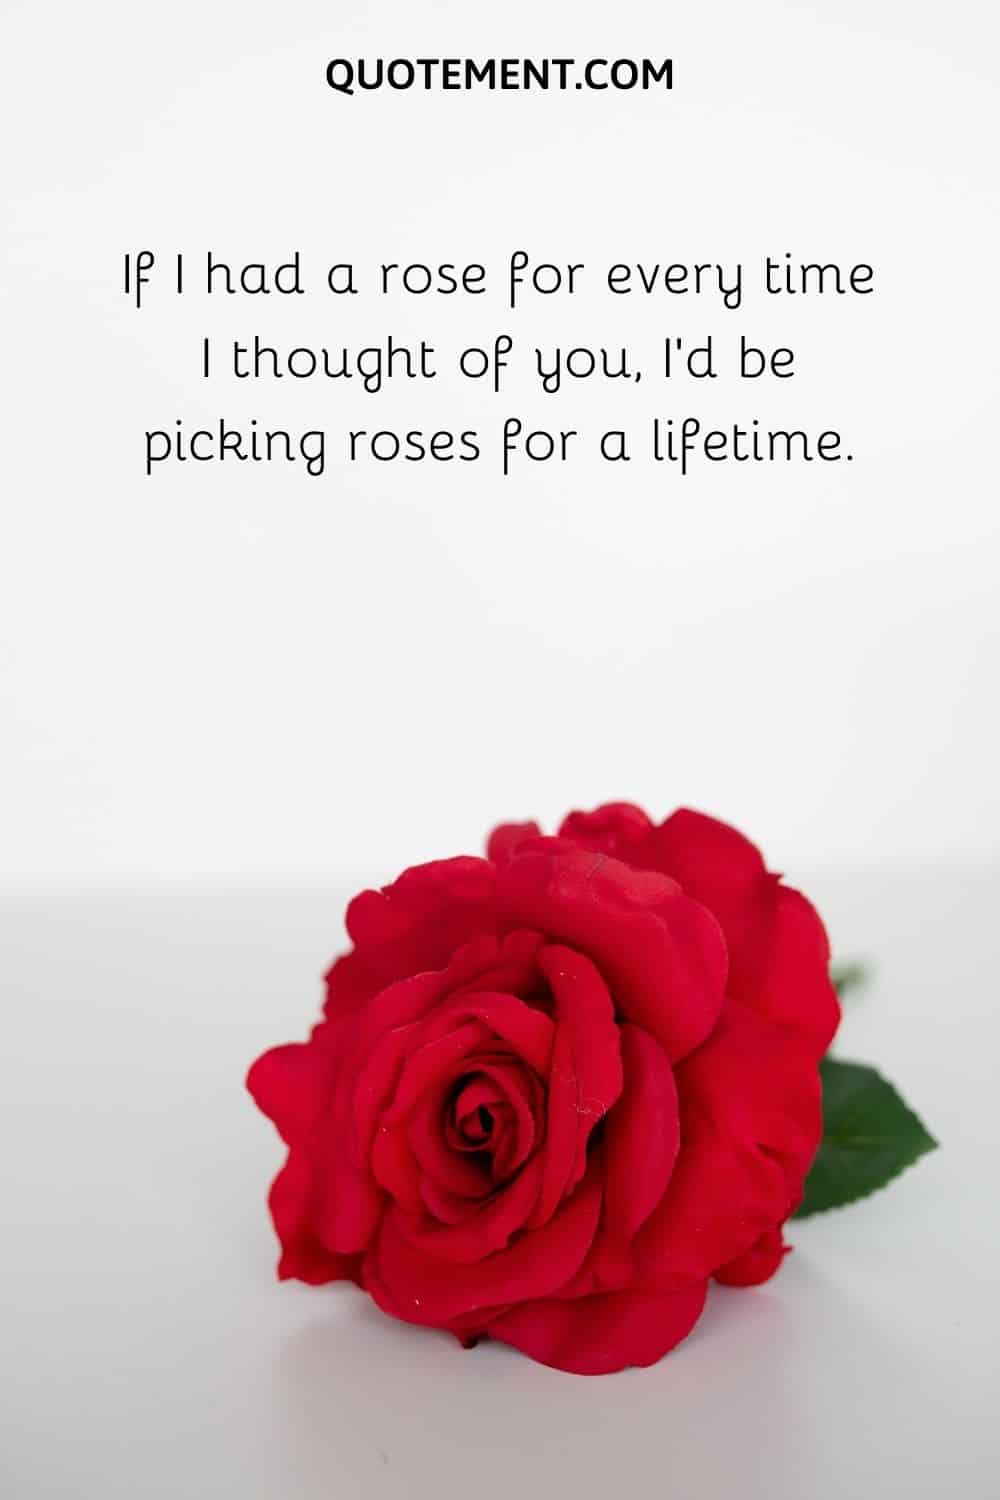 If I had a rose for every time I thought of you, I’d be picking roses for a lifetime.